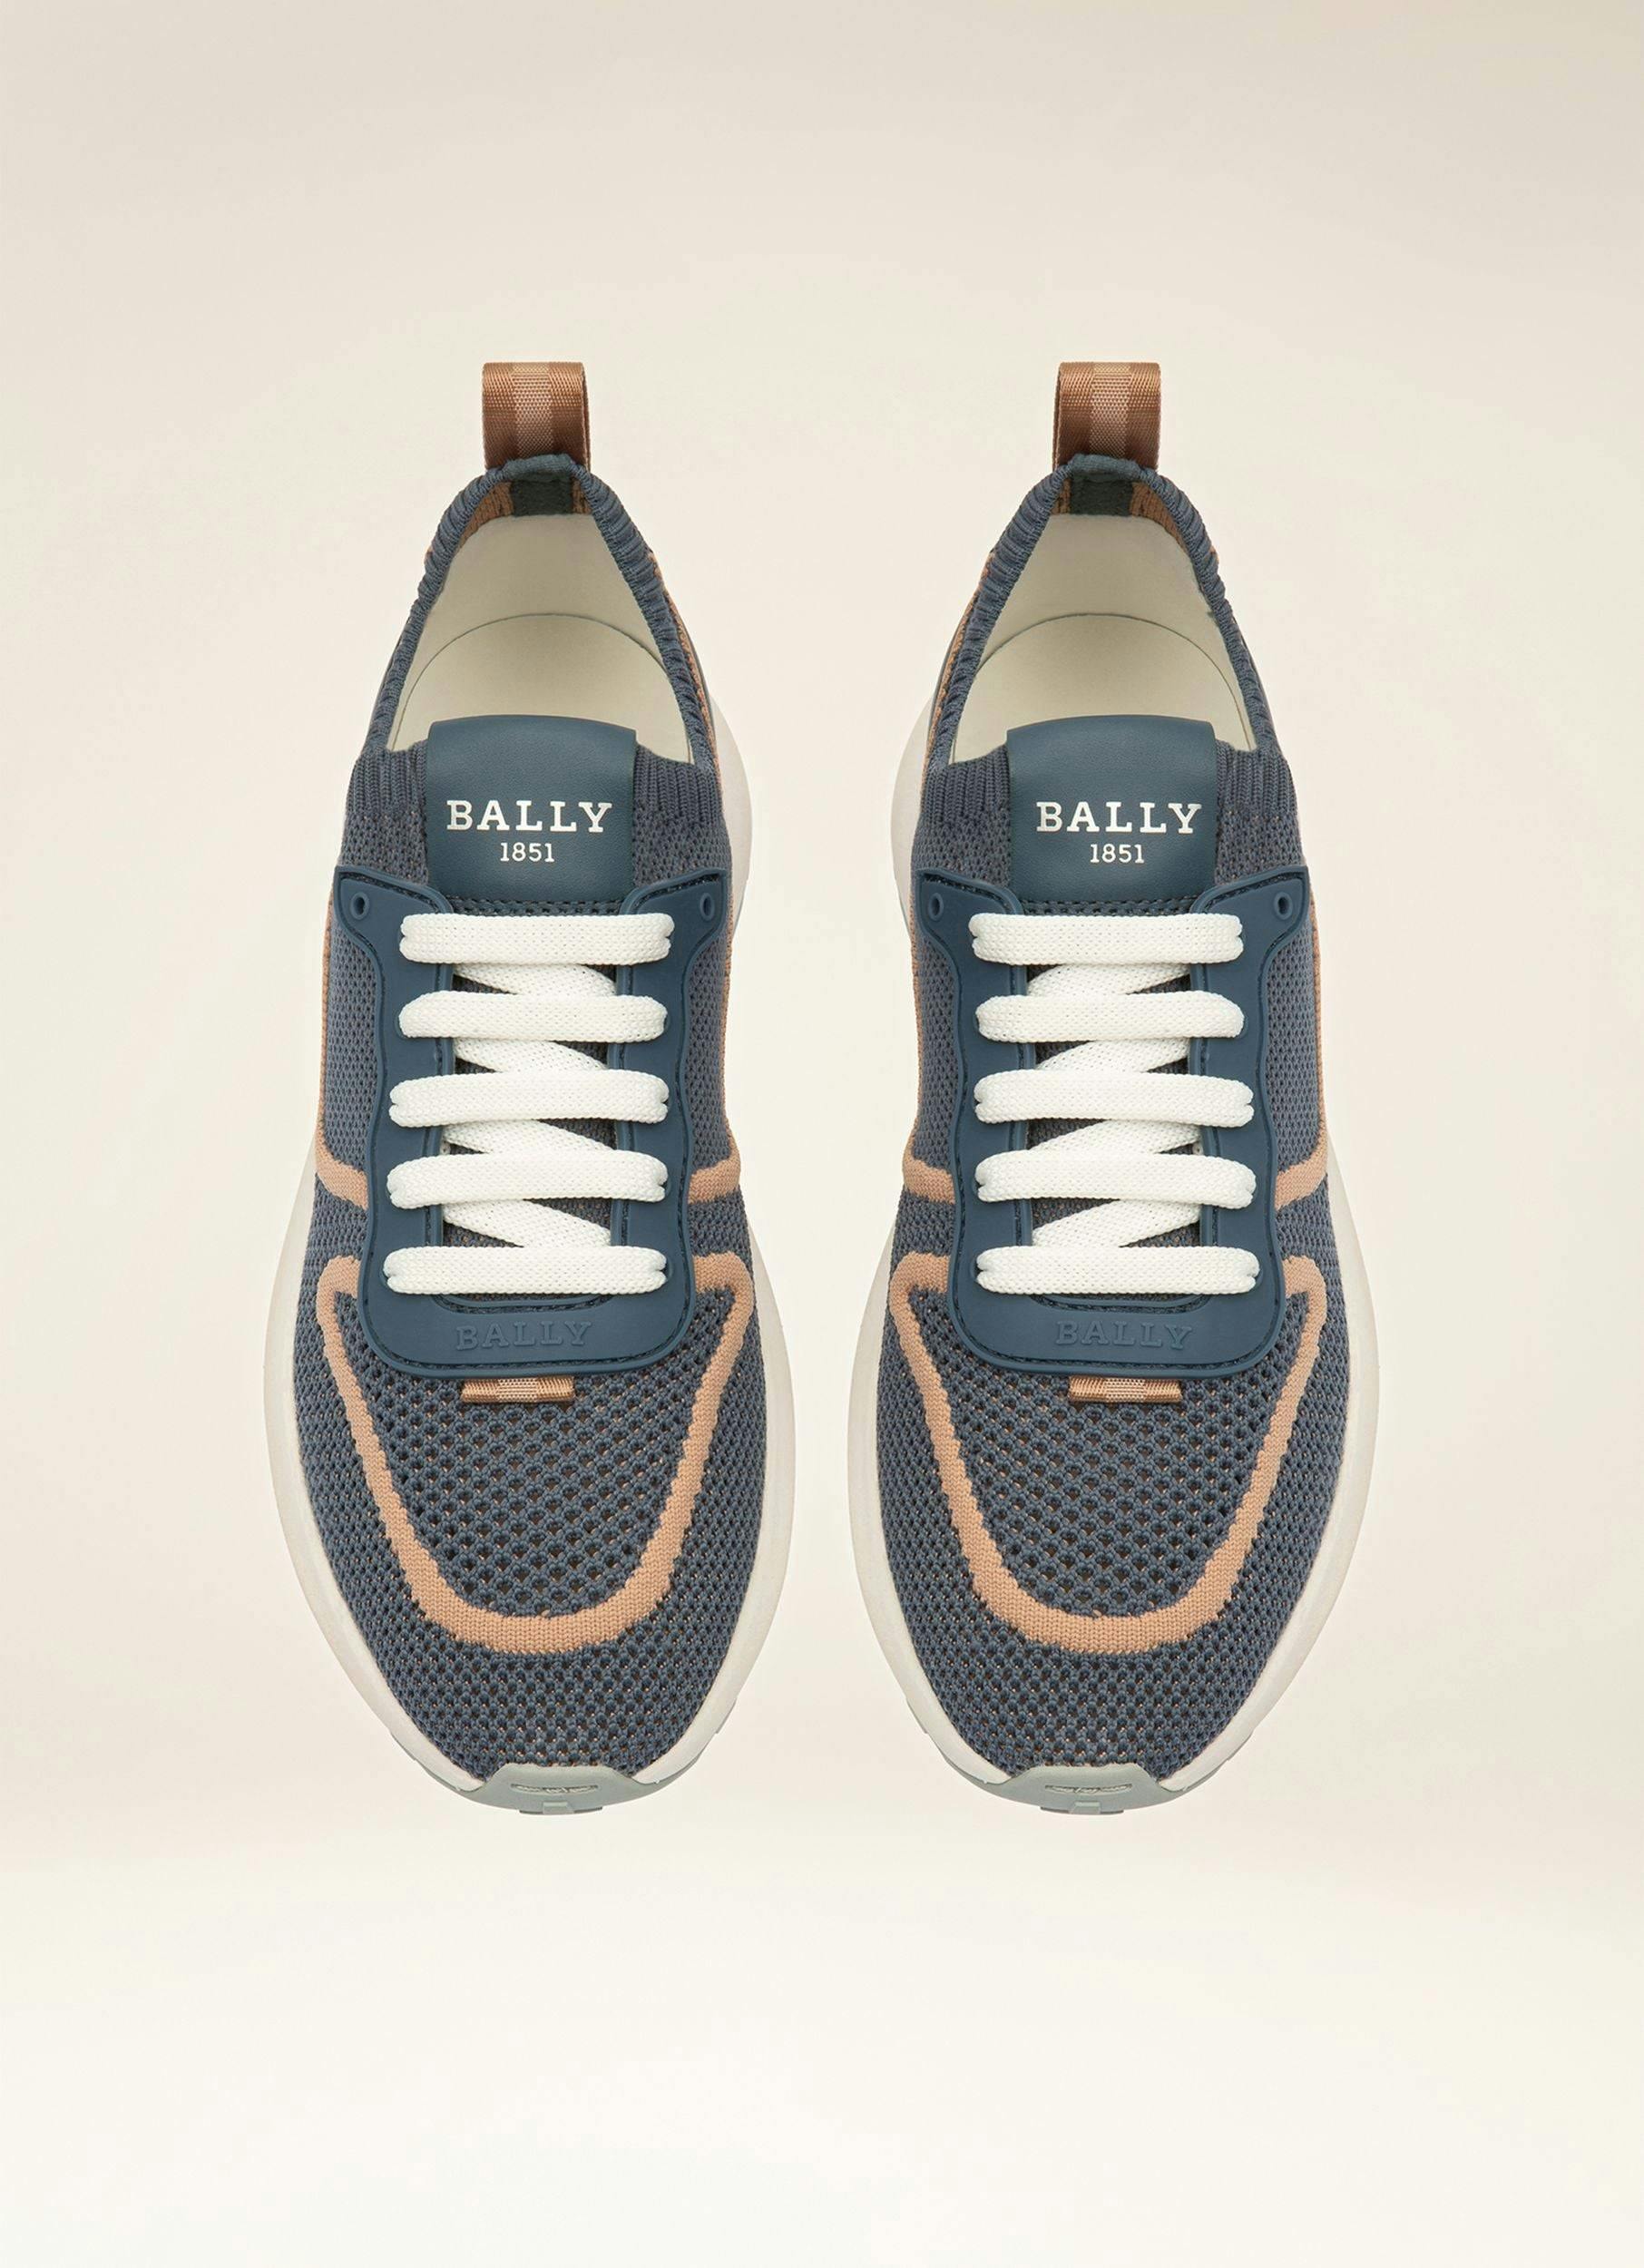 OUTLINE Polyester Mix Sneakers In Light  Blue - Women's - Bally - 04